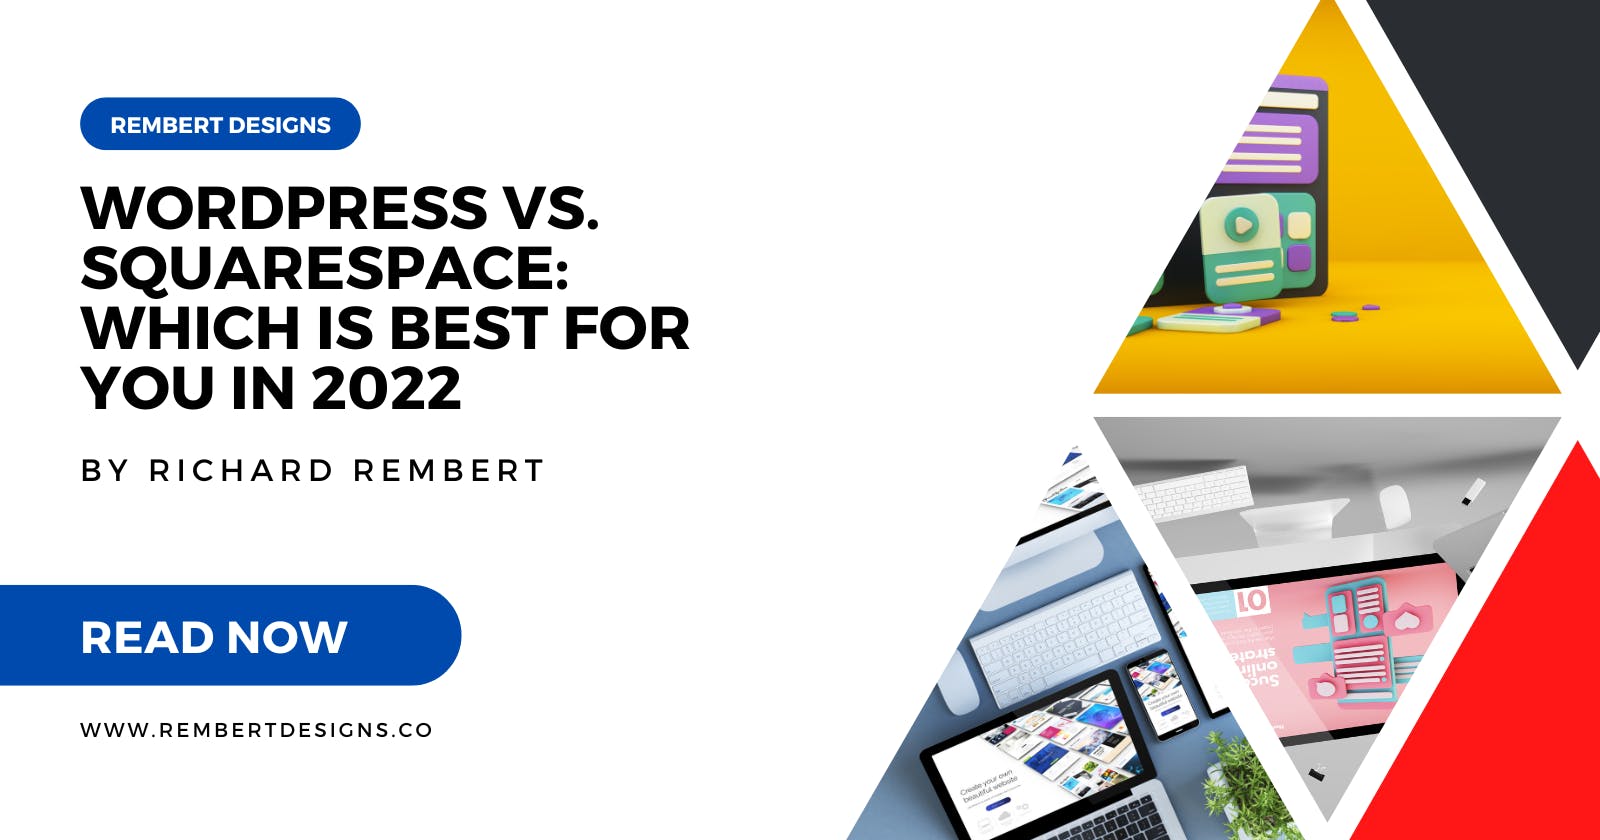 WordPress vs. Squarespace: Which is Best for You in 2022